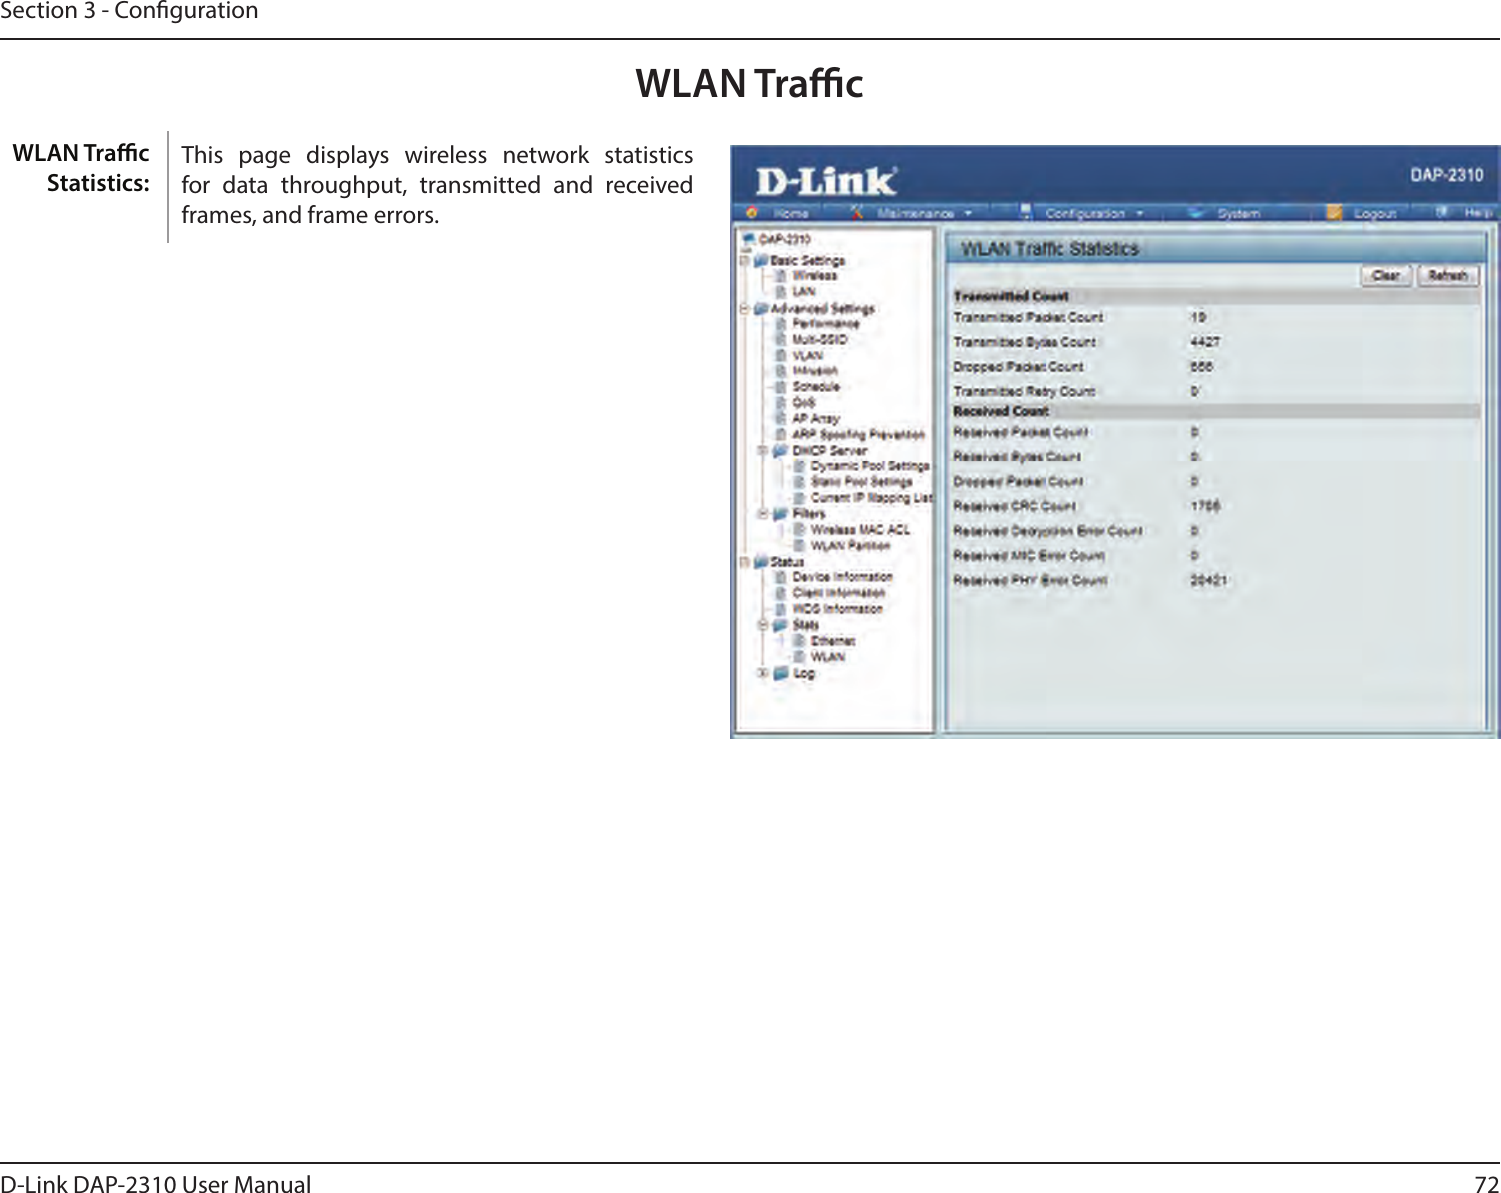 72D-Link DAP-2310 User ManualSection 3 - CongurationWLAN TracThis  page  displays  wireless  network  statistics for  data  throughput,  transmitted  and  received frames, and frame errors.WLAN Trac Statistics: